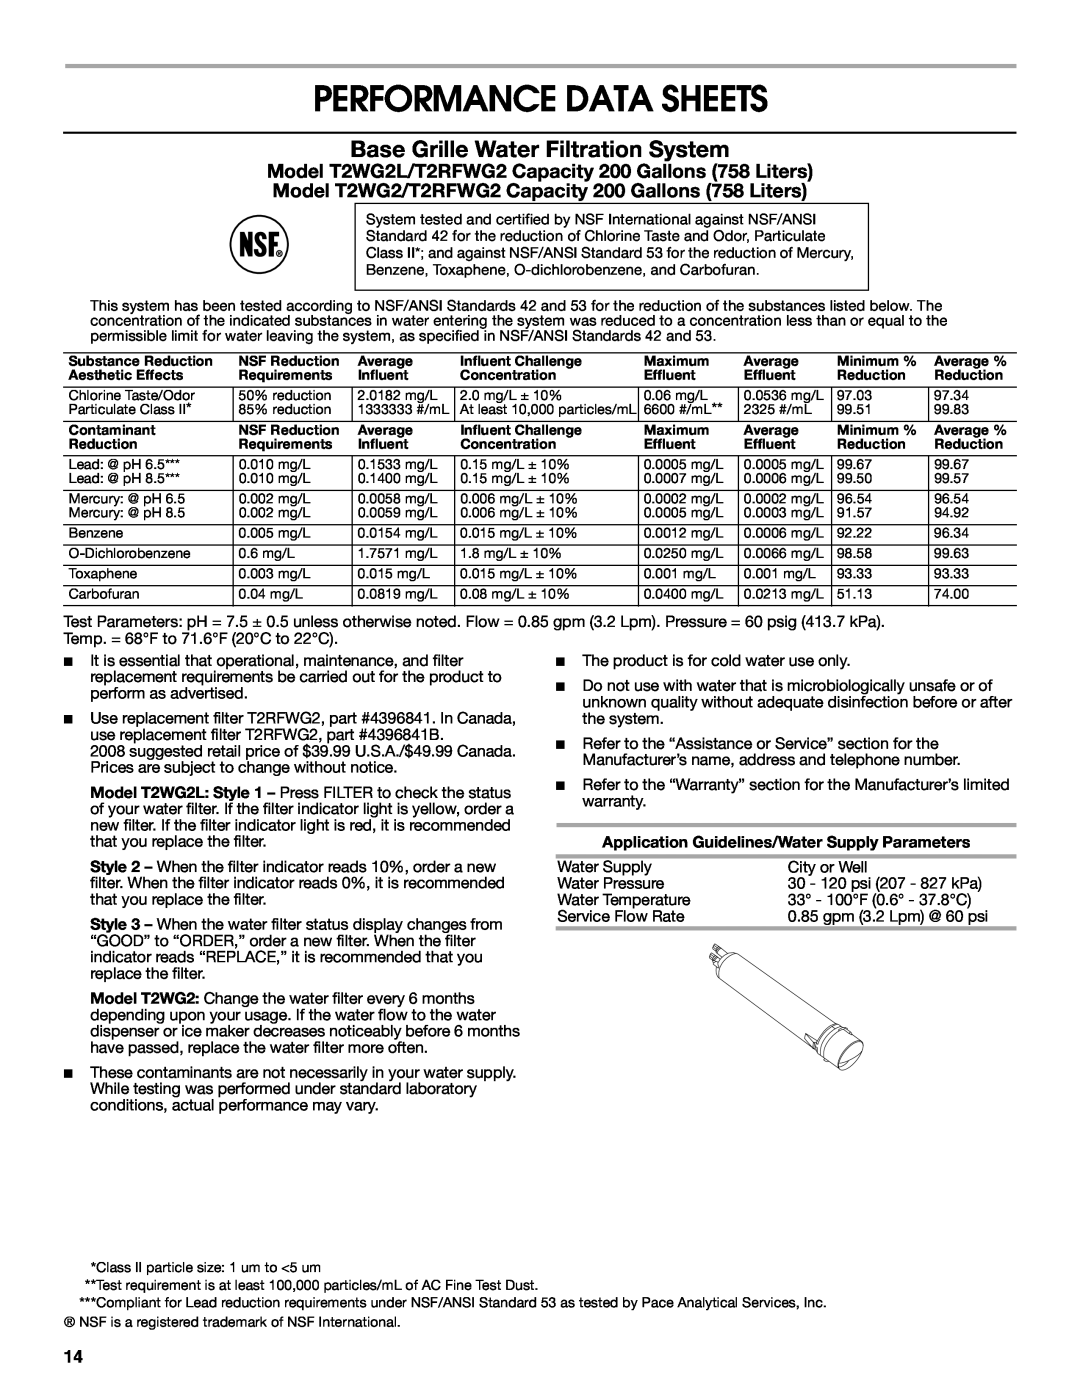 Jenn-Air W10183787A manual Performance Data Sheets, Base Grille Water Filtration System 